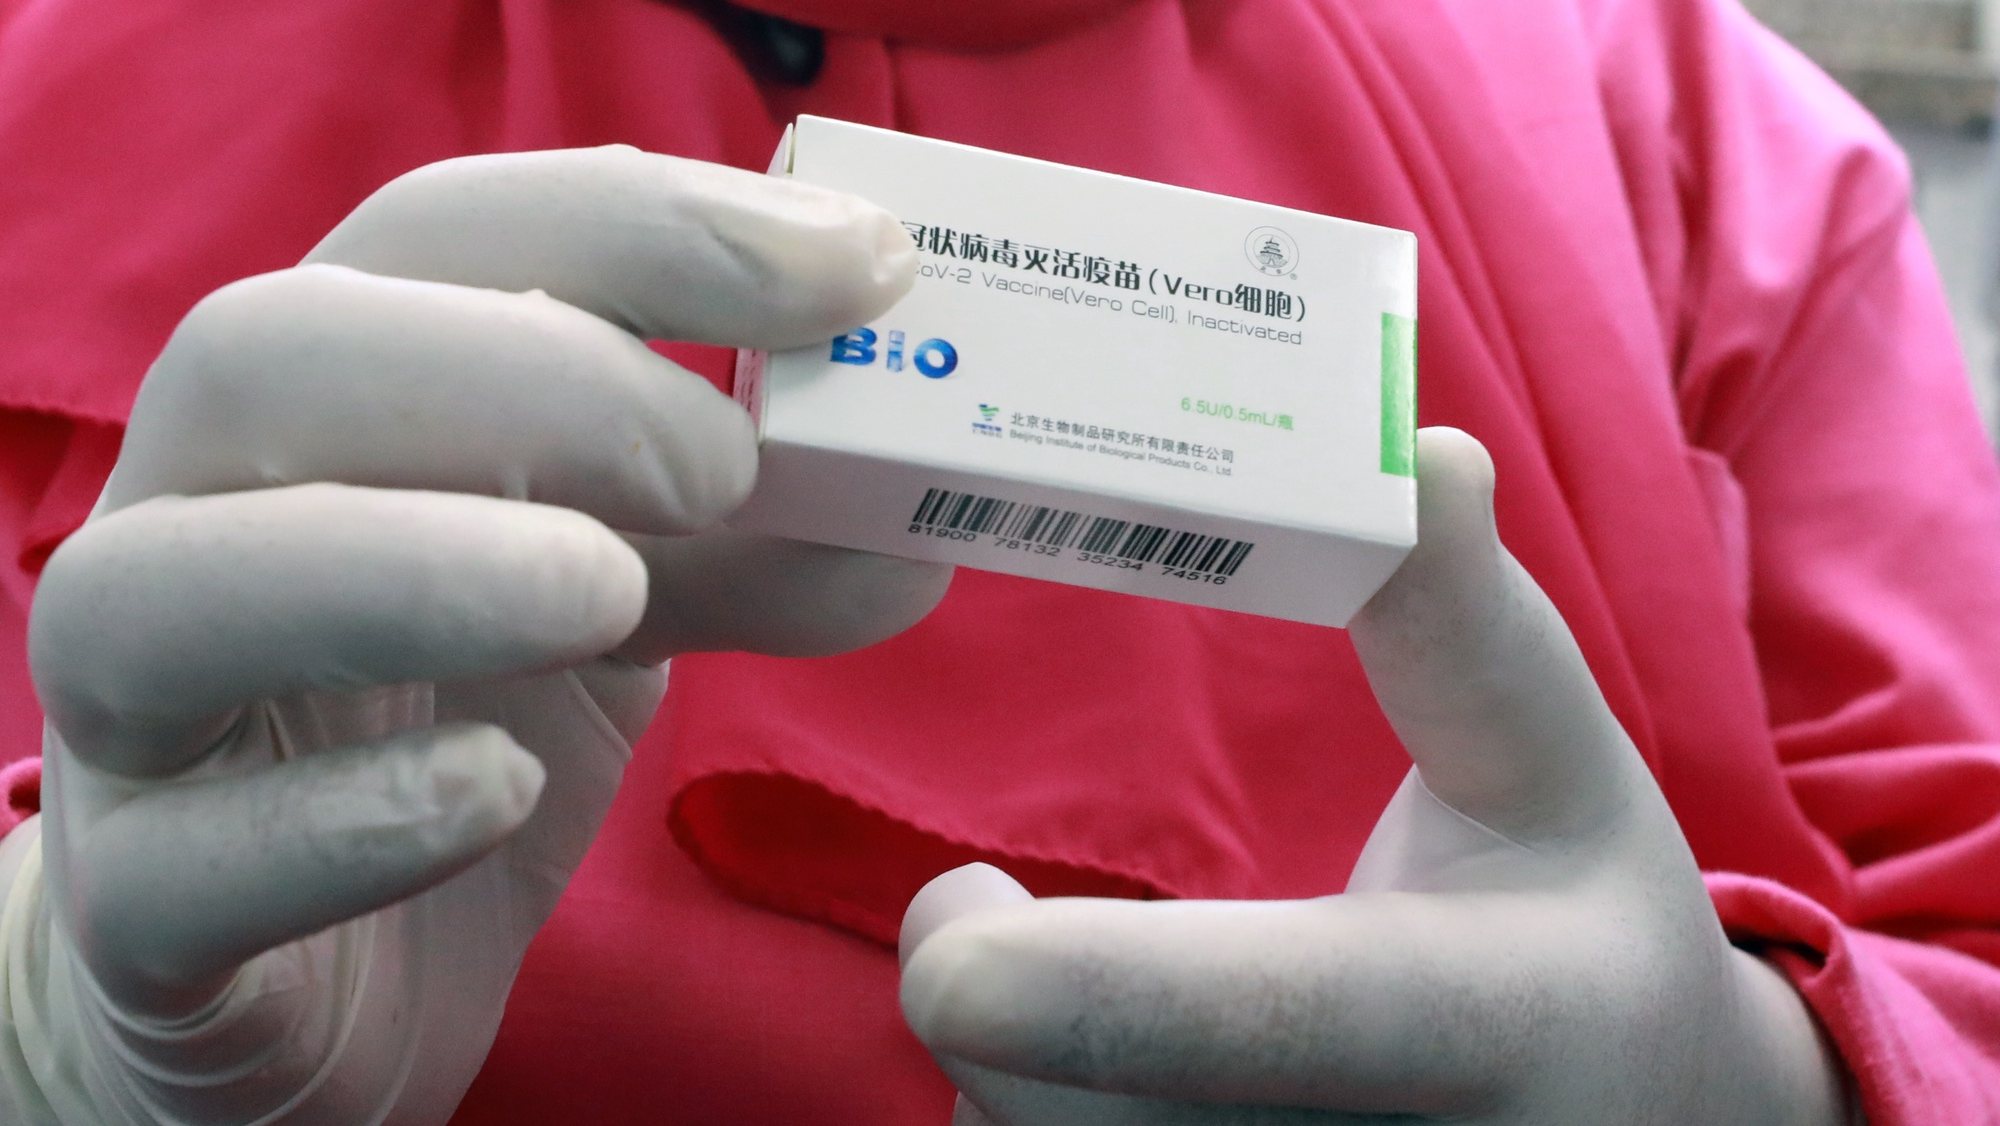 epa09256994 A nurse holds a box of the Chinese Sinopharm vaccine against COVID-19 at a vaccination center in Cairo, Egypt, 09 June 2021. The Sinopharm vaccine was listed by the World Health Organisation (WHO) on 07 May 2021 for emergency use, giving the &#039;green light for this vaccine to be rolled out globally&#039; as they said on their website.  EPA/KHALED ELFIQI